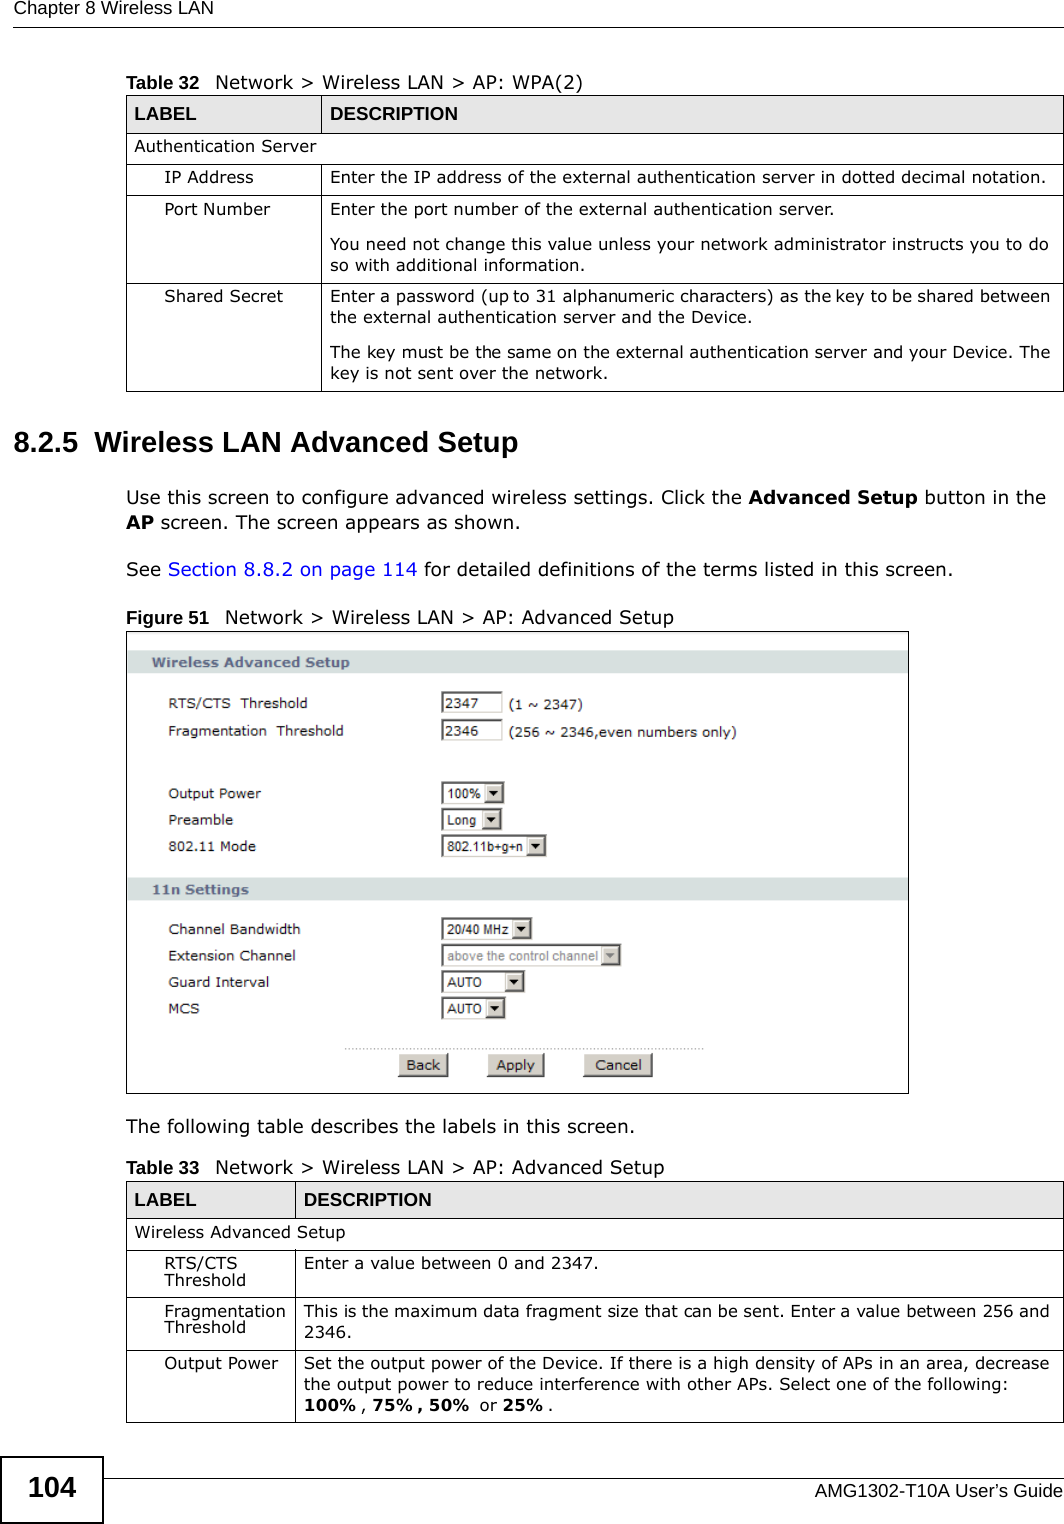 Chapter 8 Wireless LANAMG1302-T10A User’s Guide1048.2.5  Wireless LAN Advanced SetupUse this screen to configure advanced wireless settings. Click the Advanced Setup button in the AP screen. The screen appears as shown.See Section 8.8.2 on page 114 for detailed definitions of the terms listed in this screen.Figure 51   Network &gt; Wireless LAN &gt; AP: Advanced SetupThe following table describes the labels in this screen. Authentication ServerIP Address Enter the IP address of the external authentication server in dotted decimal notation.Port Number Enter the port number of the external authentication server.You need not change this value unless your network administrator instructs you to do so with additional information. Shared Secret Enter a password (up to 31 alphanumeric characters) as the key to be shared between the external authentication server and the Device.The key must be the same on the external authentication server and your Device. The key is not sent over the network. Table 32   Network &gt; Wireless LAN &gt; AP: WPA(2)LABEL DESCRIPTIONTable 33   Network &gt; Wireless LAN &gt; AP: Advanced SetupLABEL DESCRIPTIONWireless Advanced SetupRTS/CTS Threshold Enter a value between 0 and 2347. Fragmentation Threshold This is the maximum data fragment size that can be sent. Enter a value between 256 and 2346. Output Power Set the output power of the Device. If there is a high density of APs in an area, decrease the output power to reduce interference with other APs. Select one of the following: 100%, 75%, 50% or 25%. 